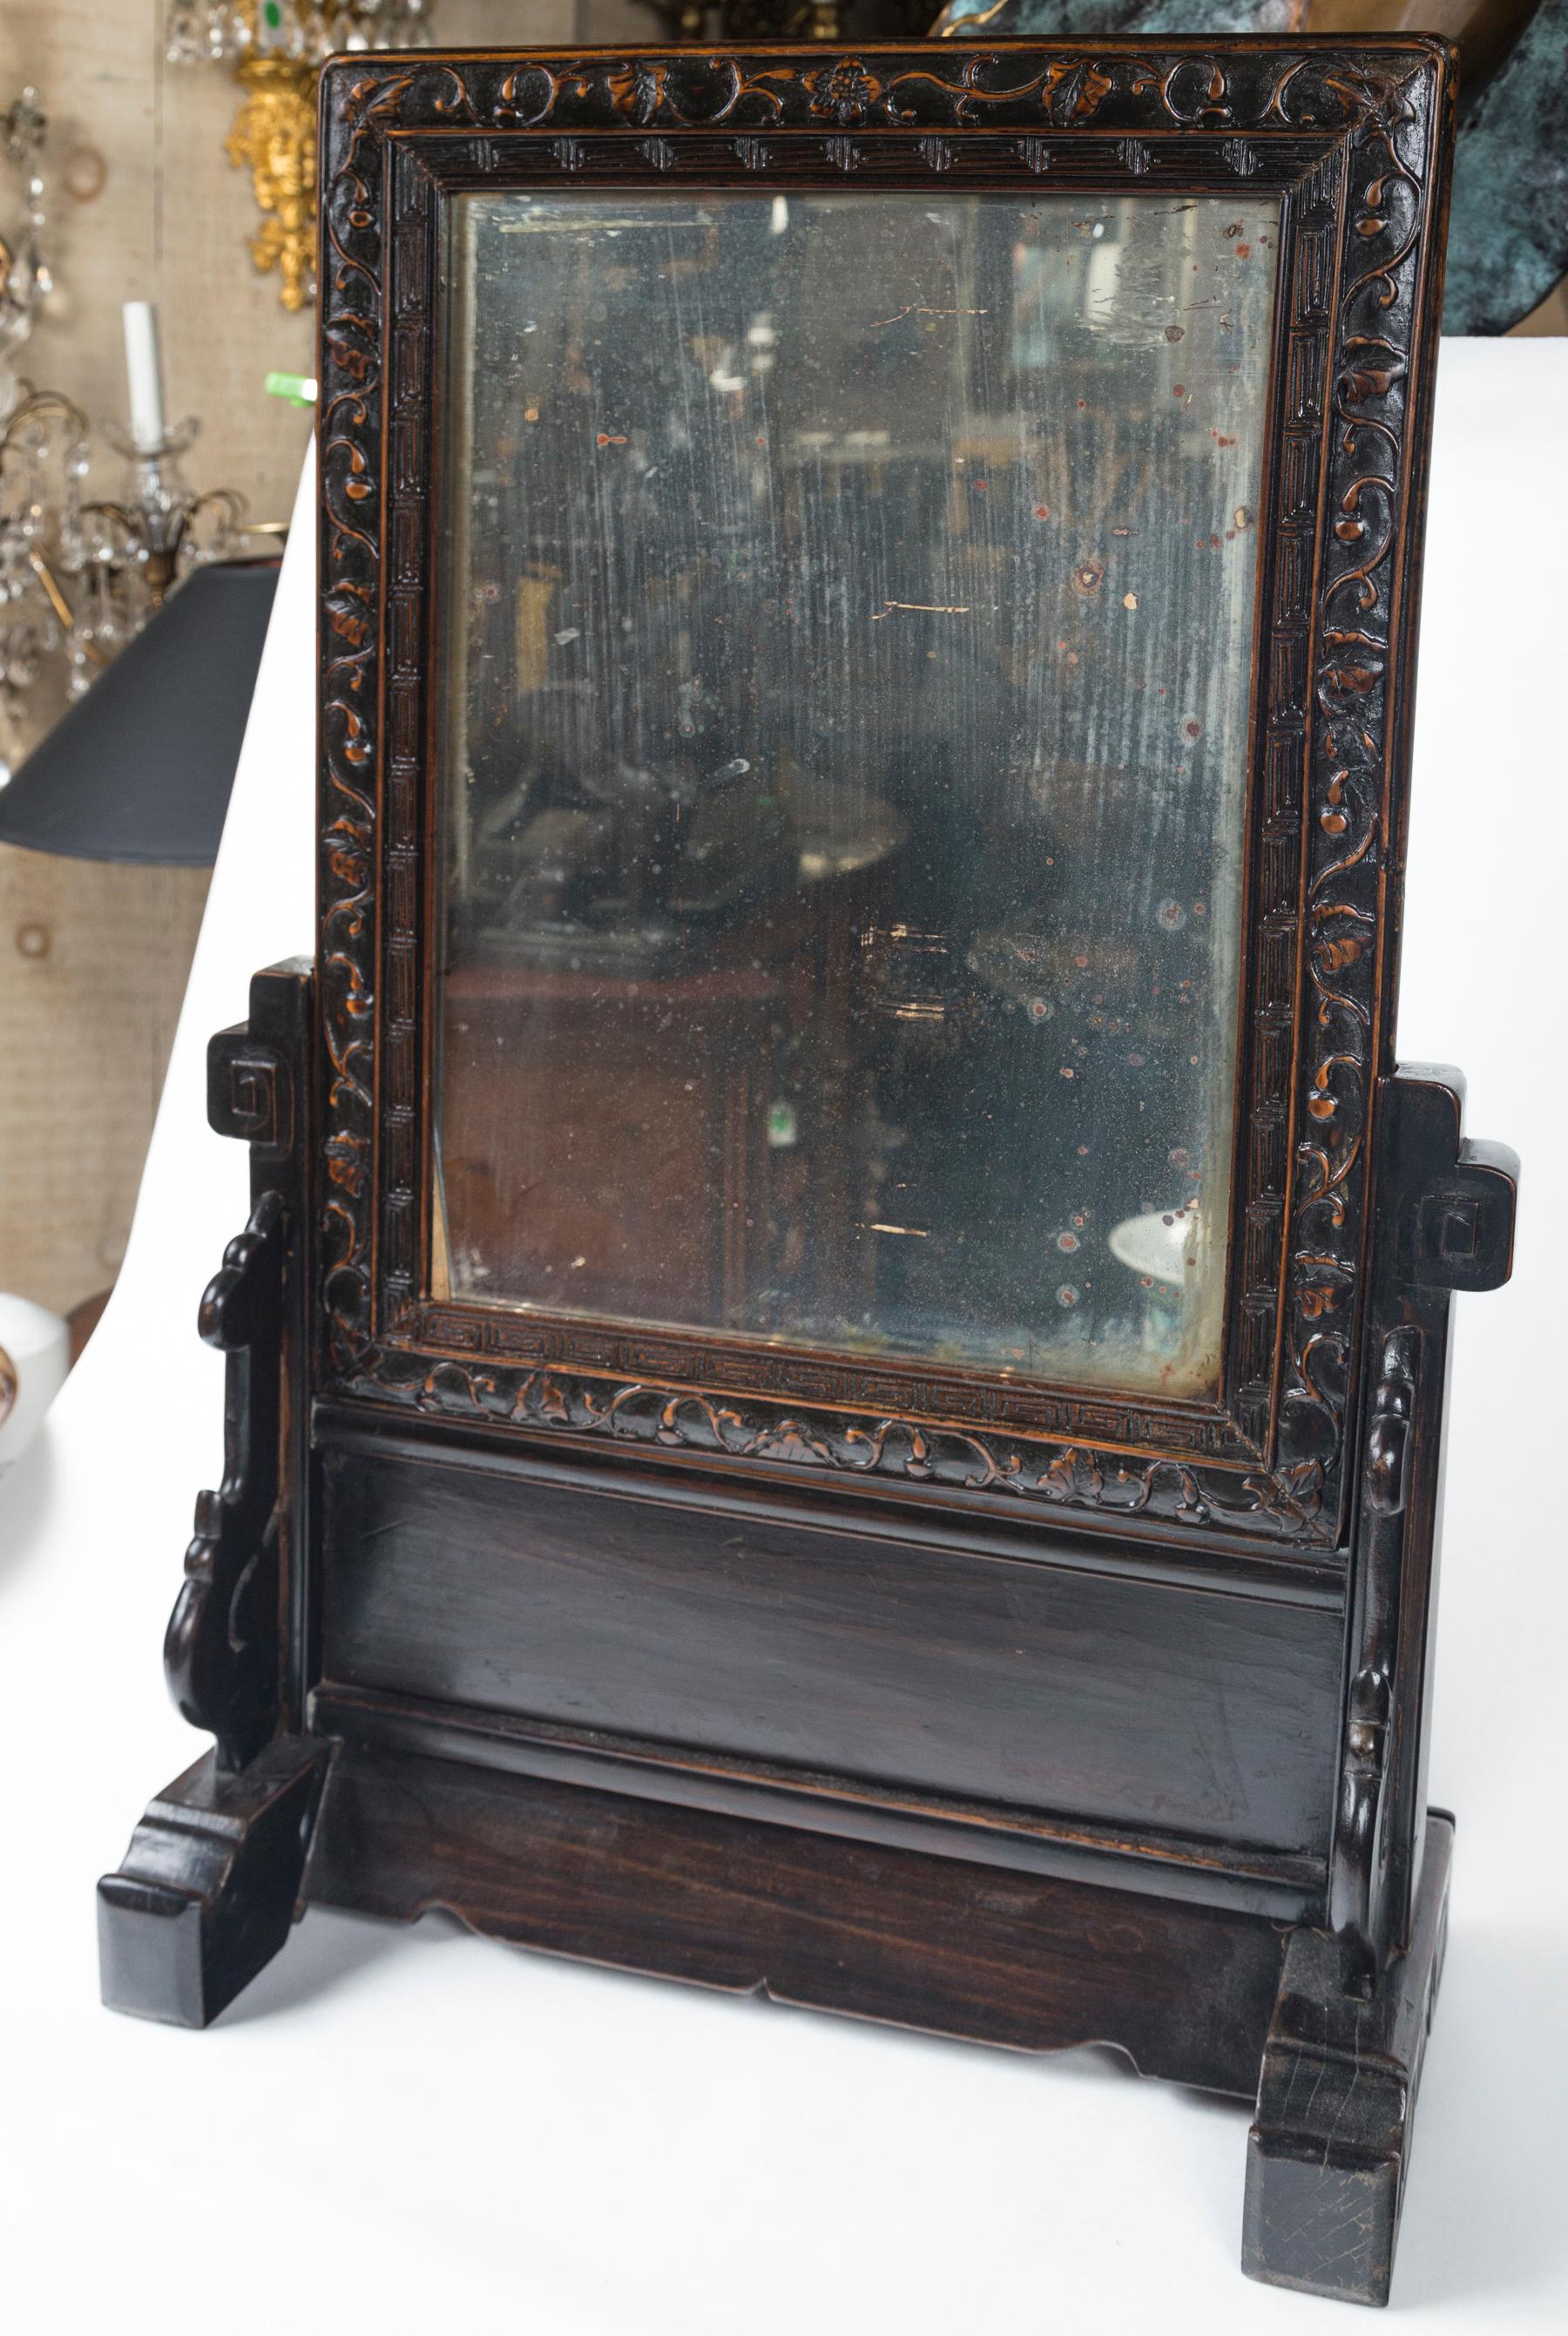 The mirror lifts out of the stand. The mirror alone measures 18.25 tall and 14.75 wide. The dimensions shows are the over all dimensions. Classic, delicate Chinese style hand carving covers almost all of the wood. The distressed glass, seems